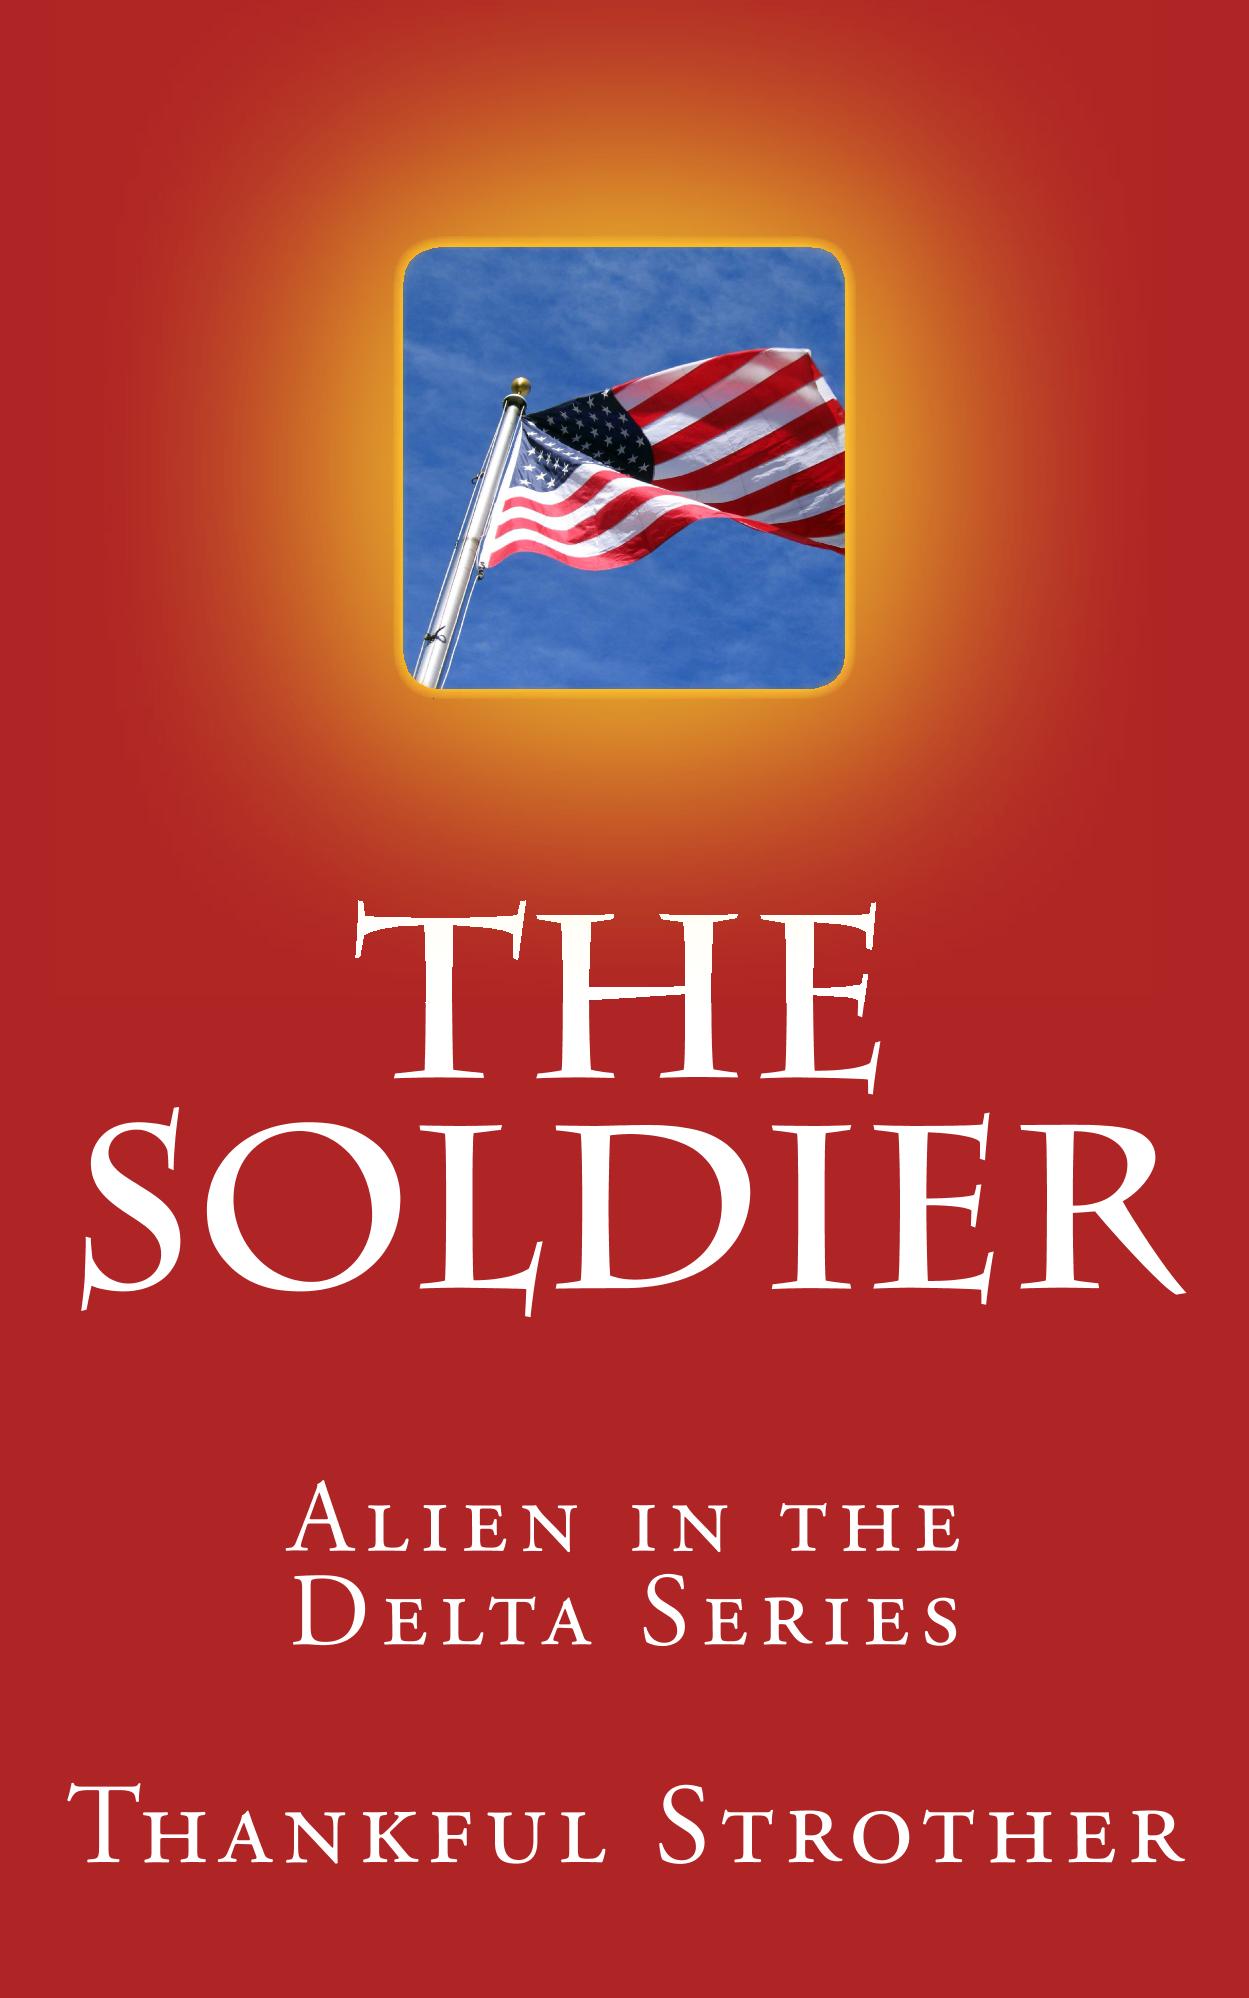 The Soldier – Alien in the Delta by Thankful Strother